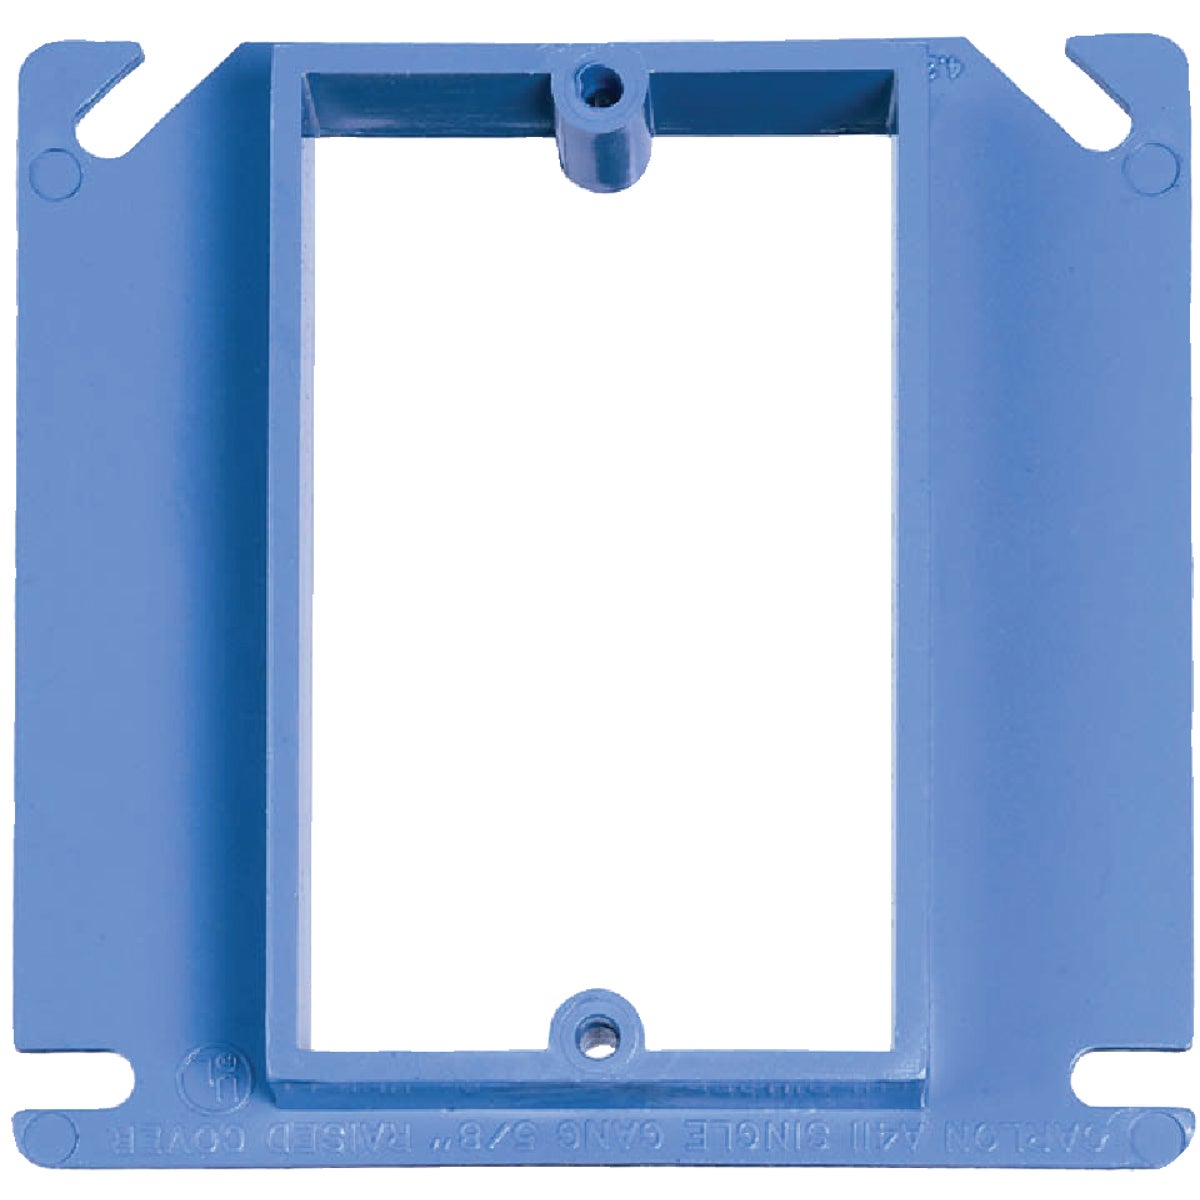 Item 540579, PVC, 4-inch square, single gang raised cover. 1/2-inch rise.